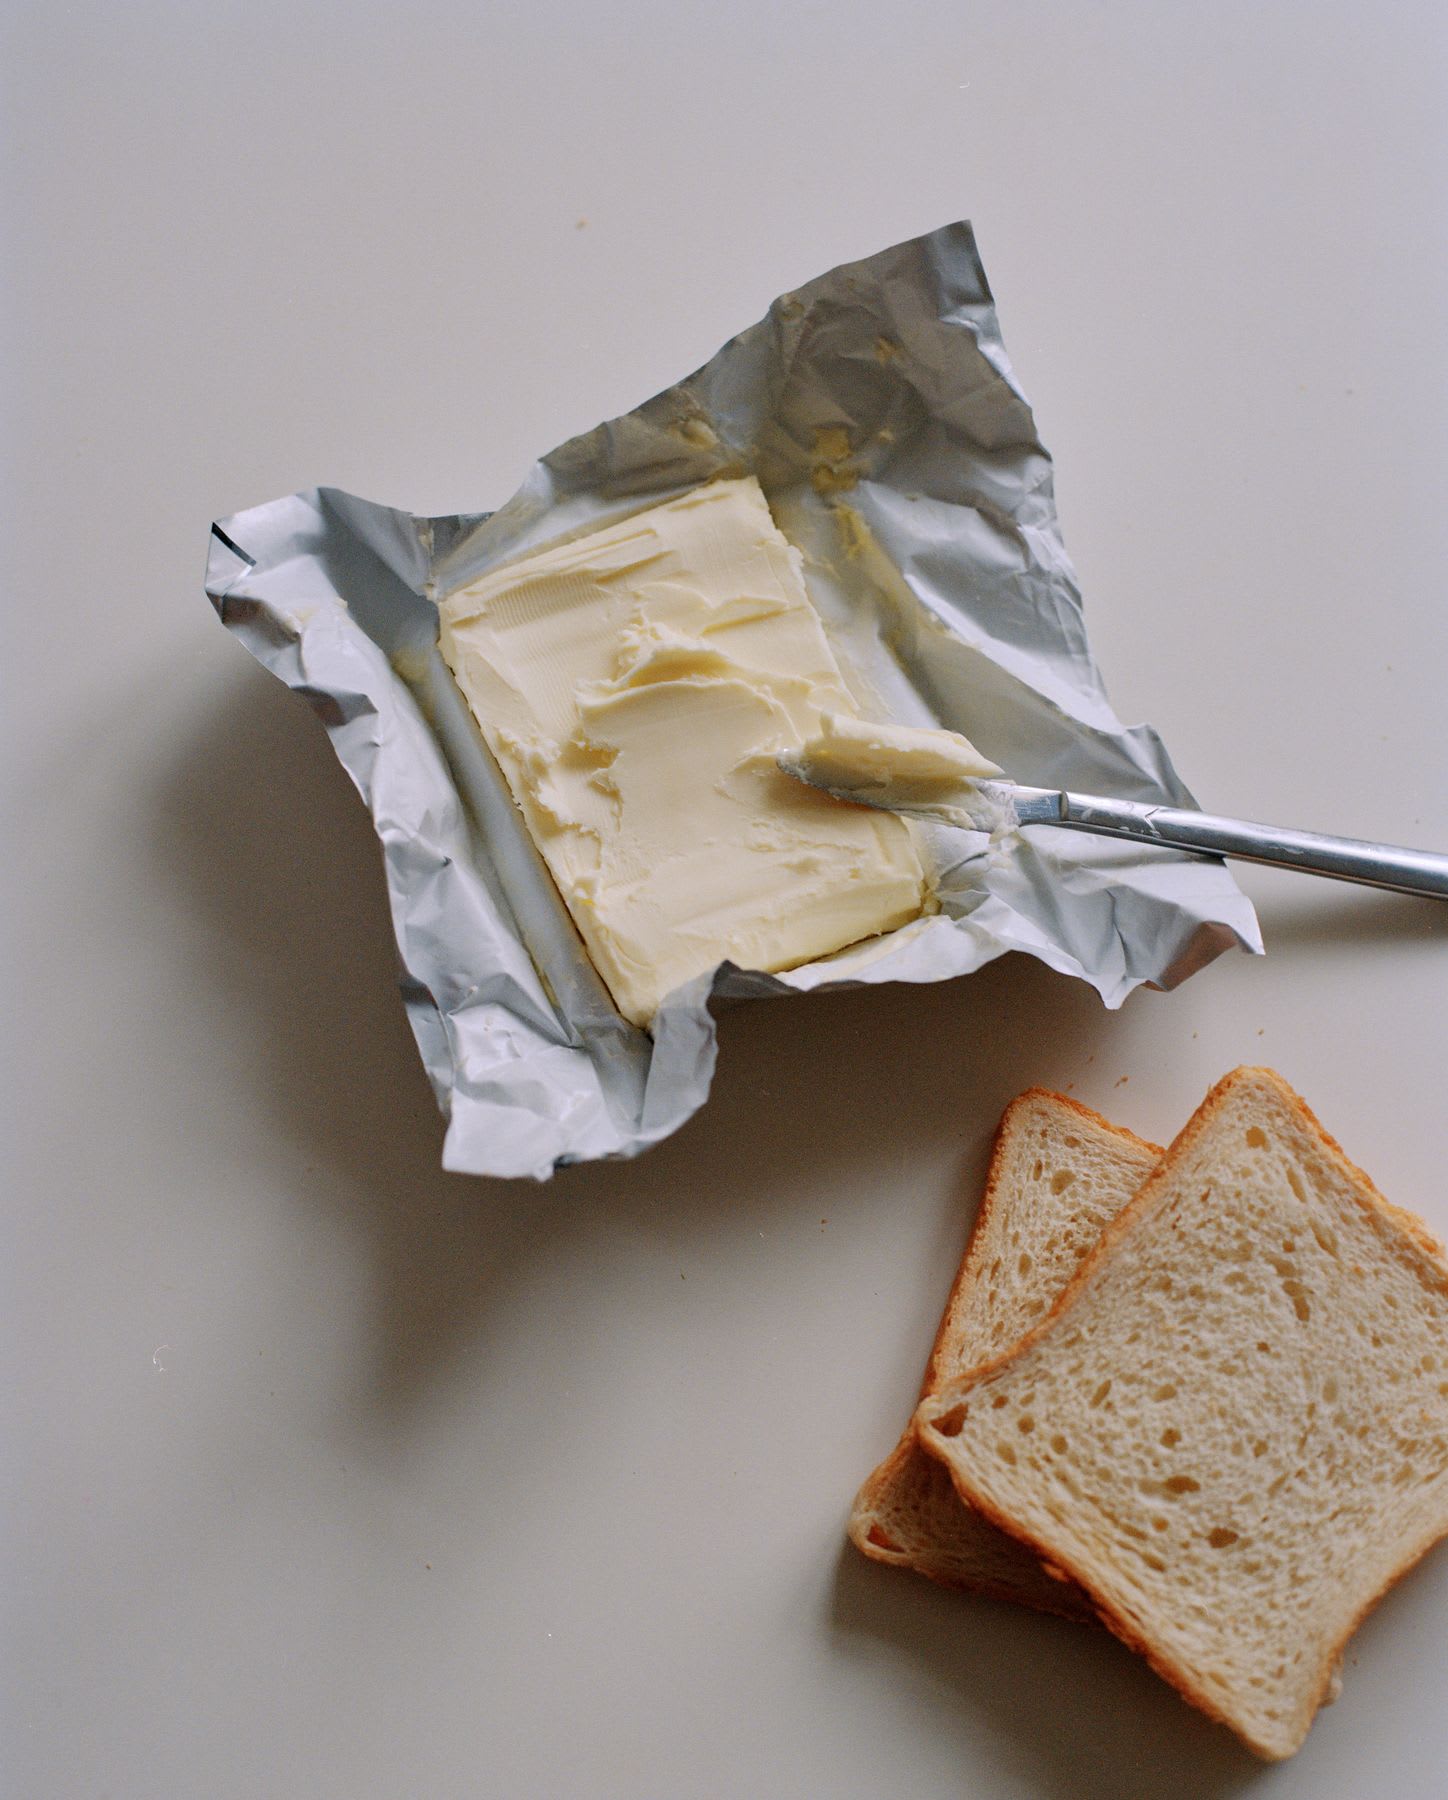 Block of butter with a knife next to two slices of bread.